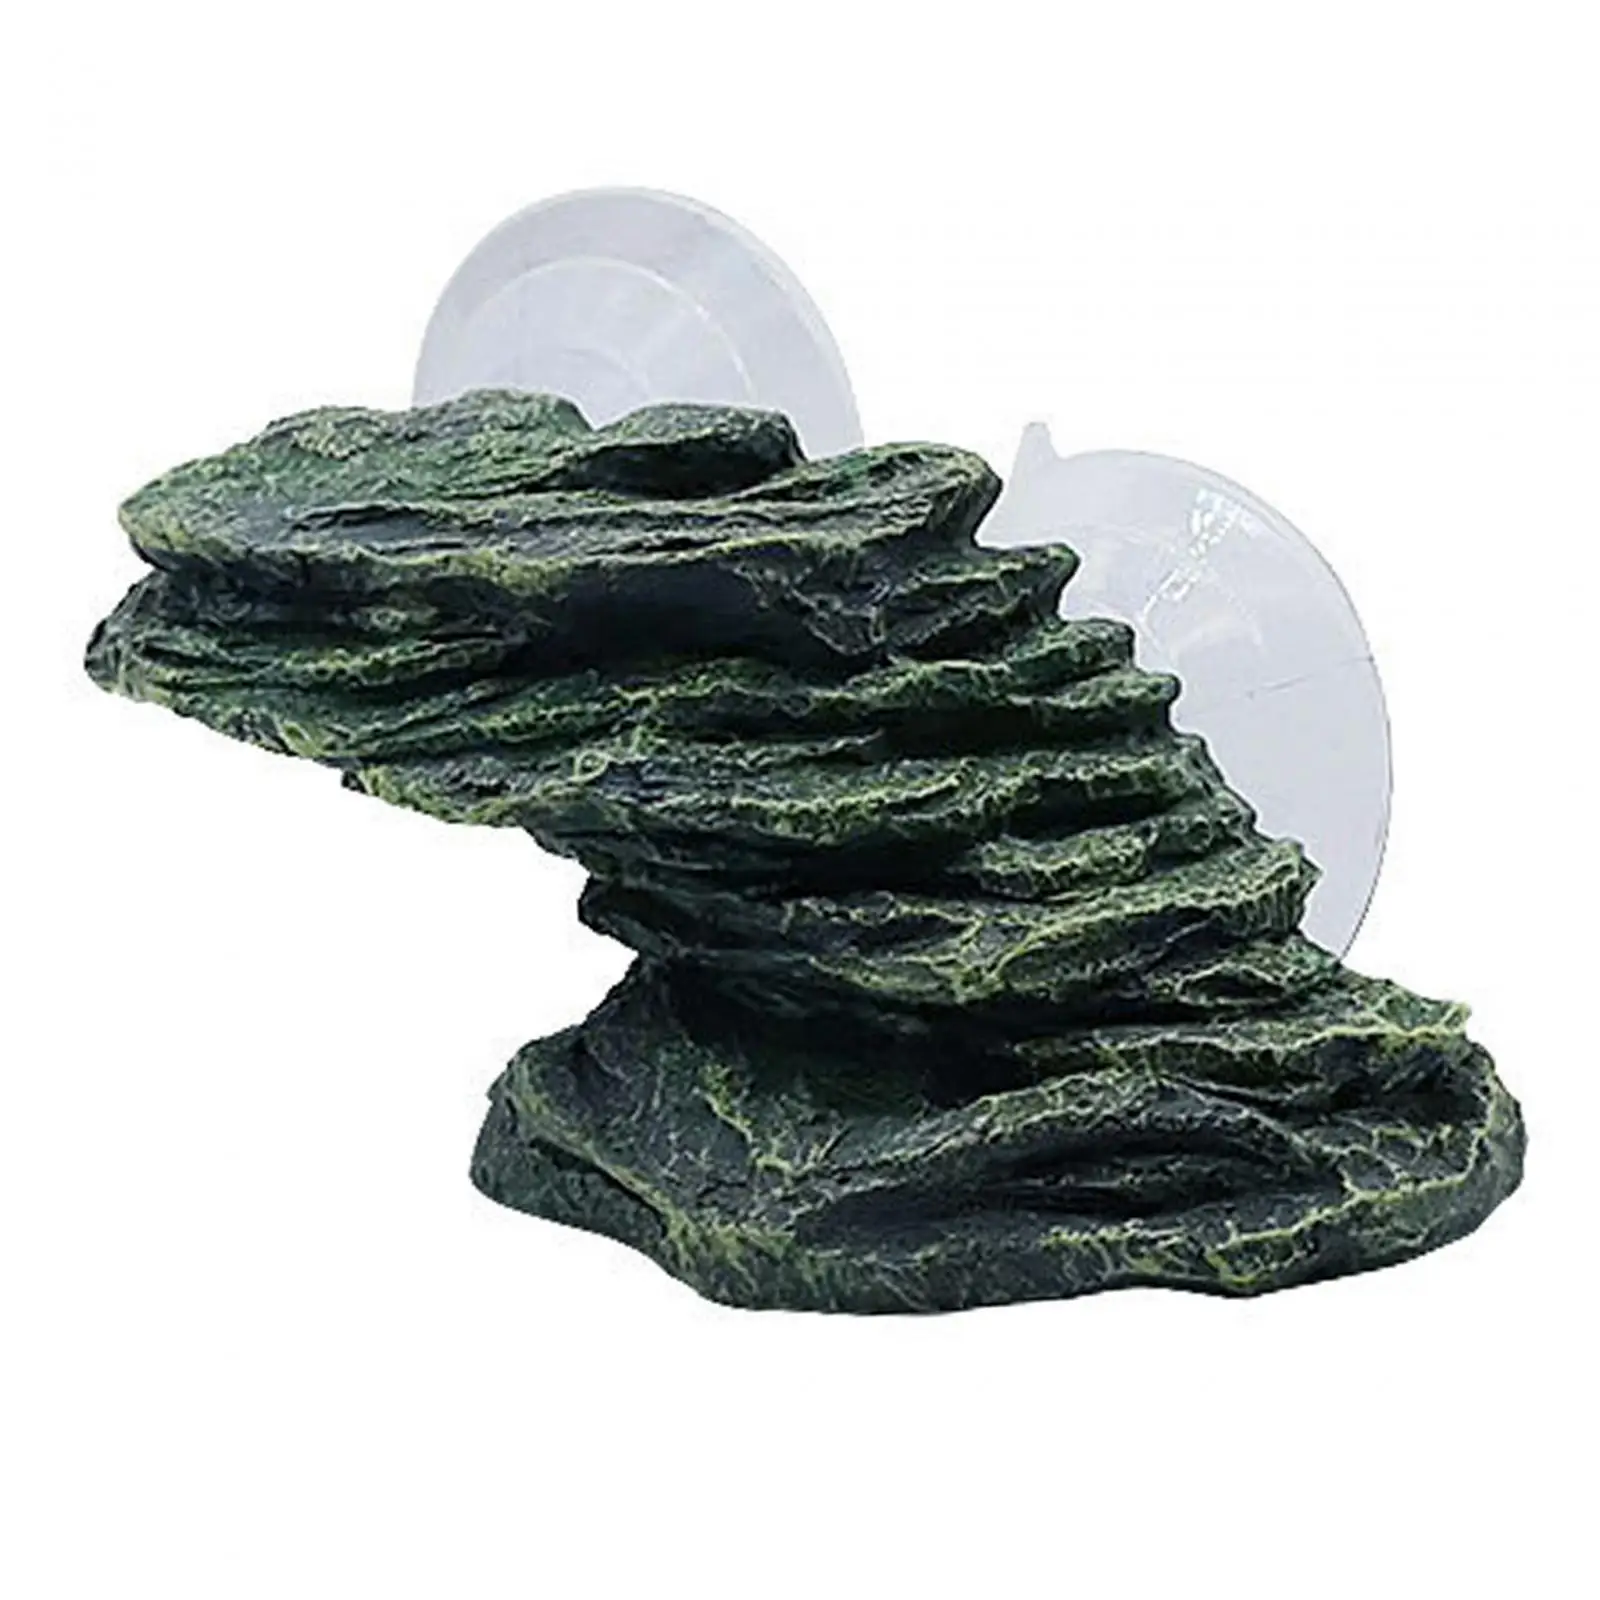 Turtle Basking Platform with Suction Cups for Frogs Amphibians Turtles